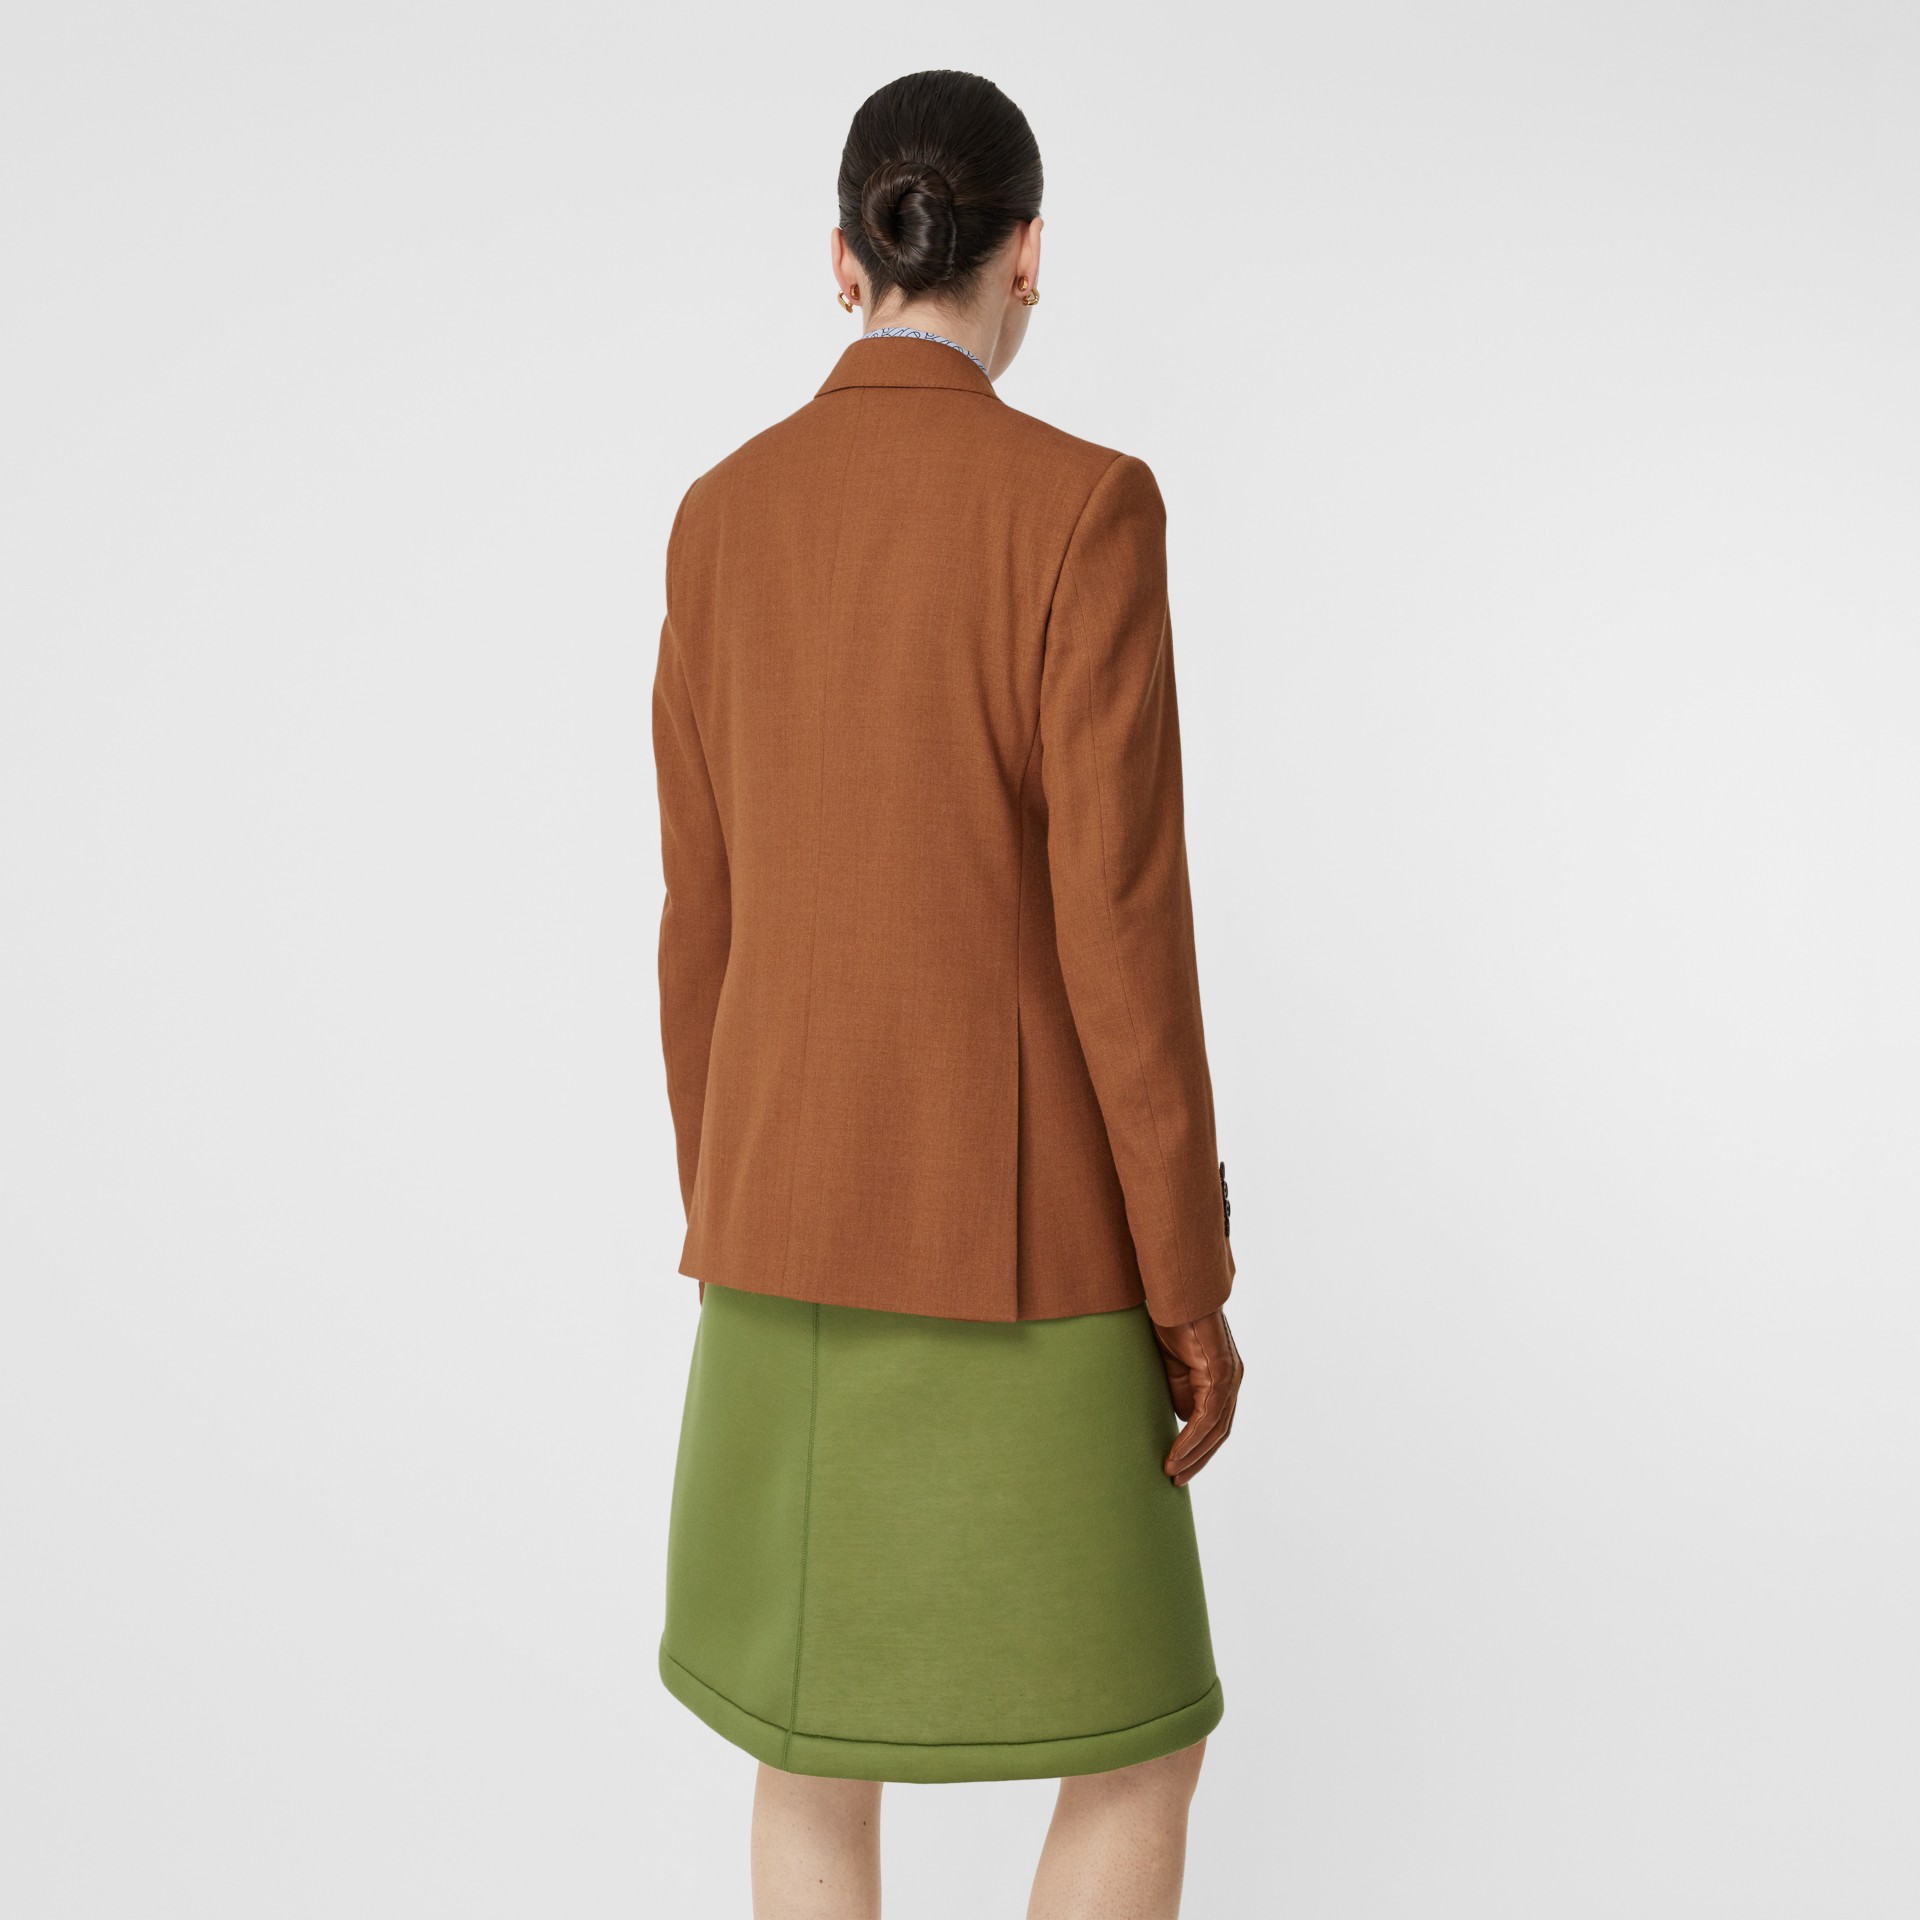 Wool, Silk and Cotton Blazer in Rust - Women | Burberry United States